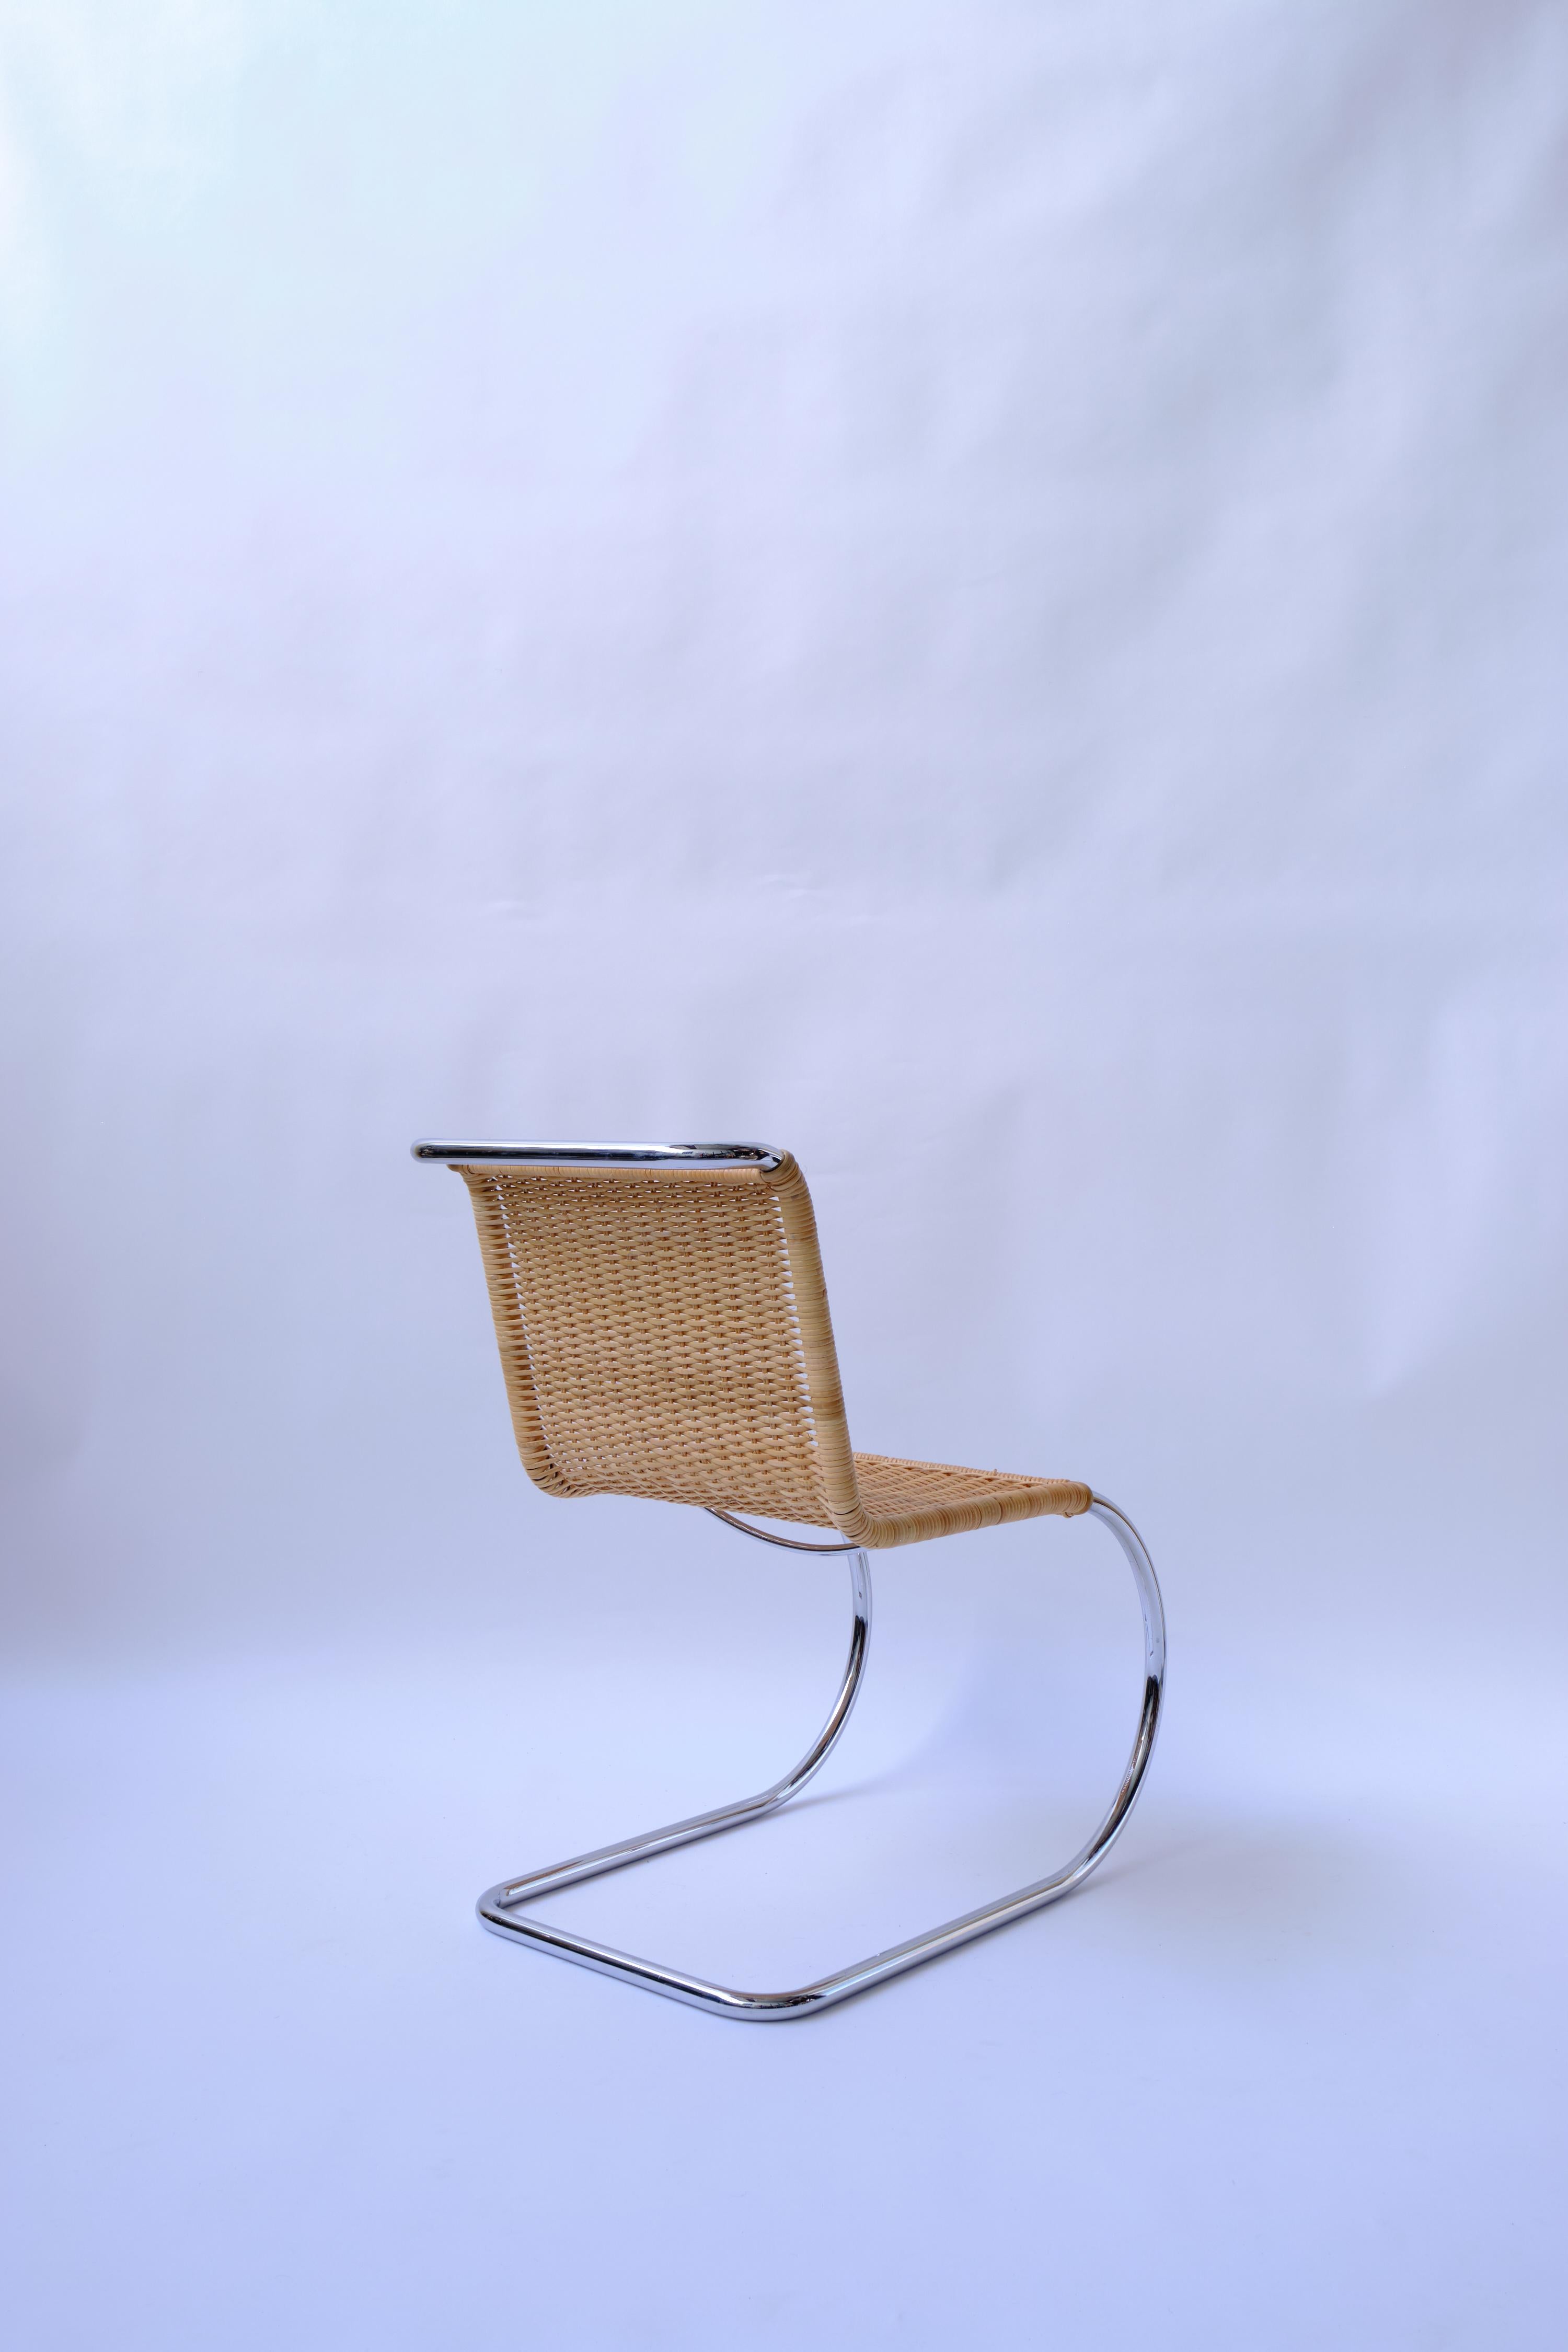 Bauhaus Cane and Chrome MR10 Cantilever Chairs by Mies Van Der Rohe, Knoll 1970s reissue For Sale